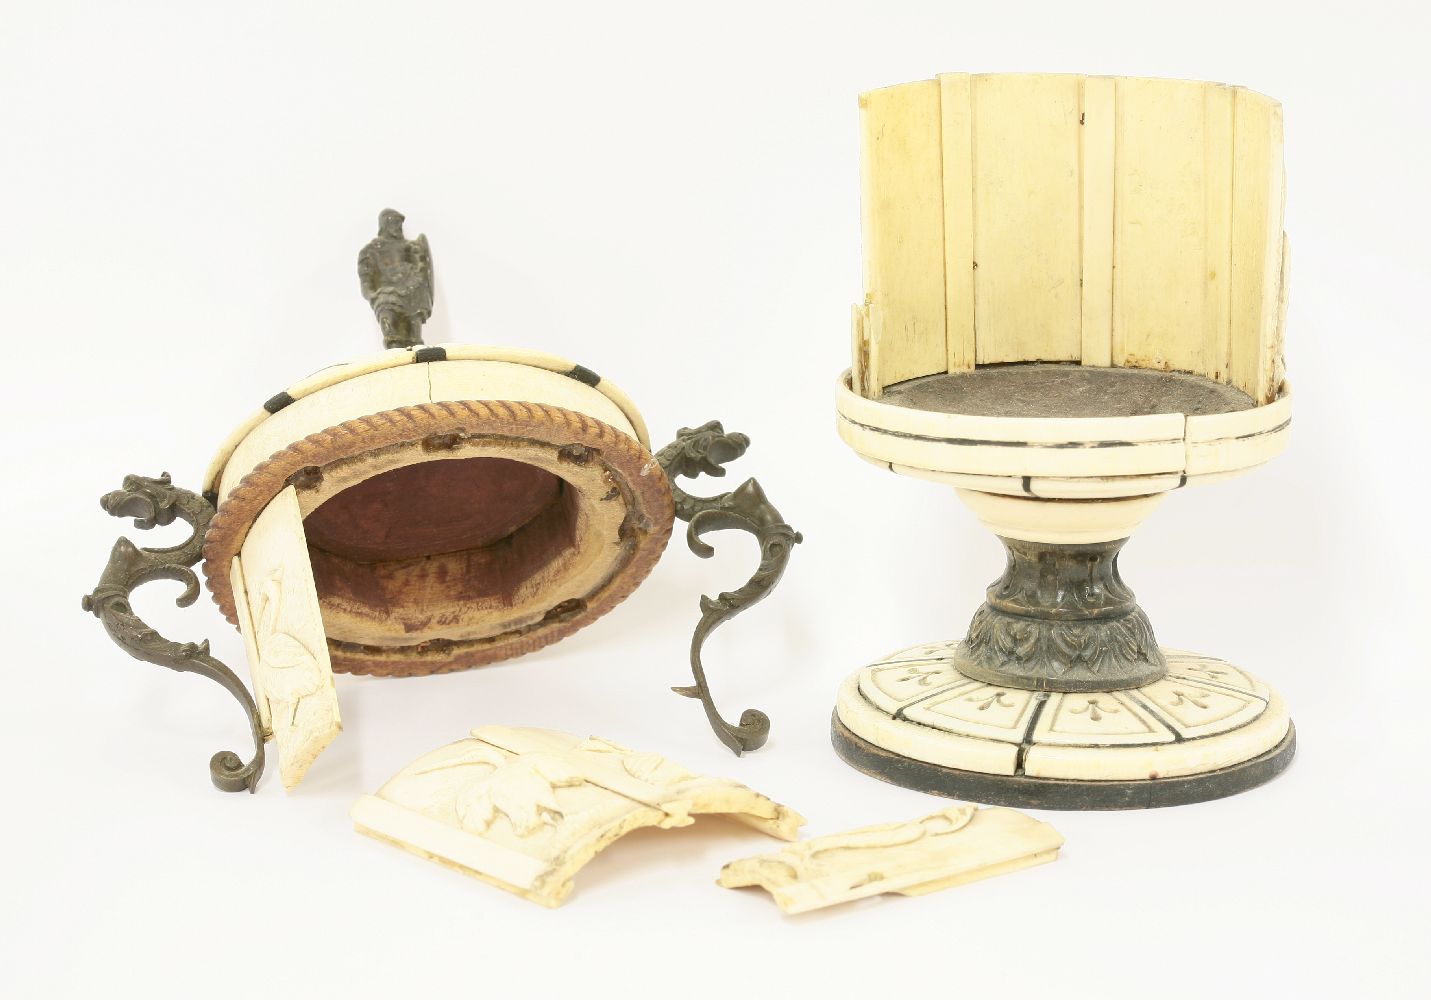 An Italian ivory and horn cup and cover,    with bronze mounts and seven panels of storks, damaged, - Image 3 of 3